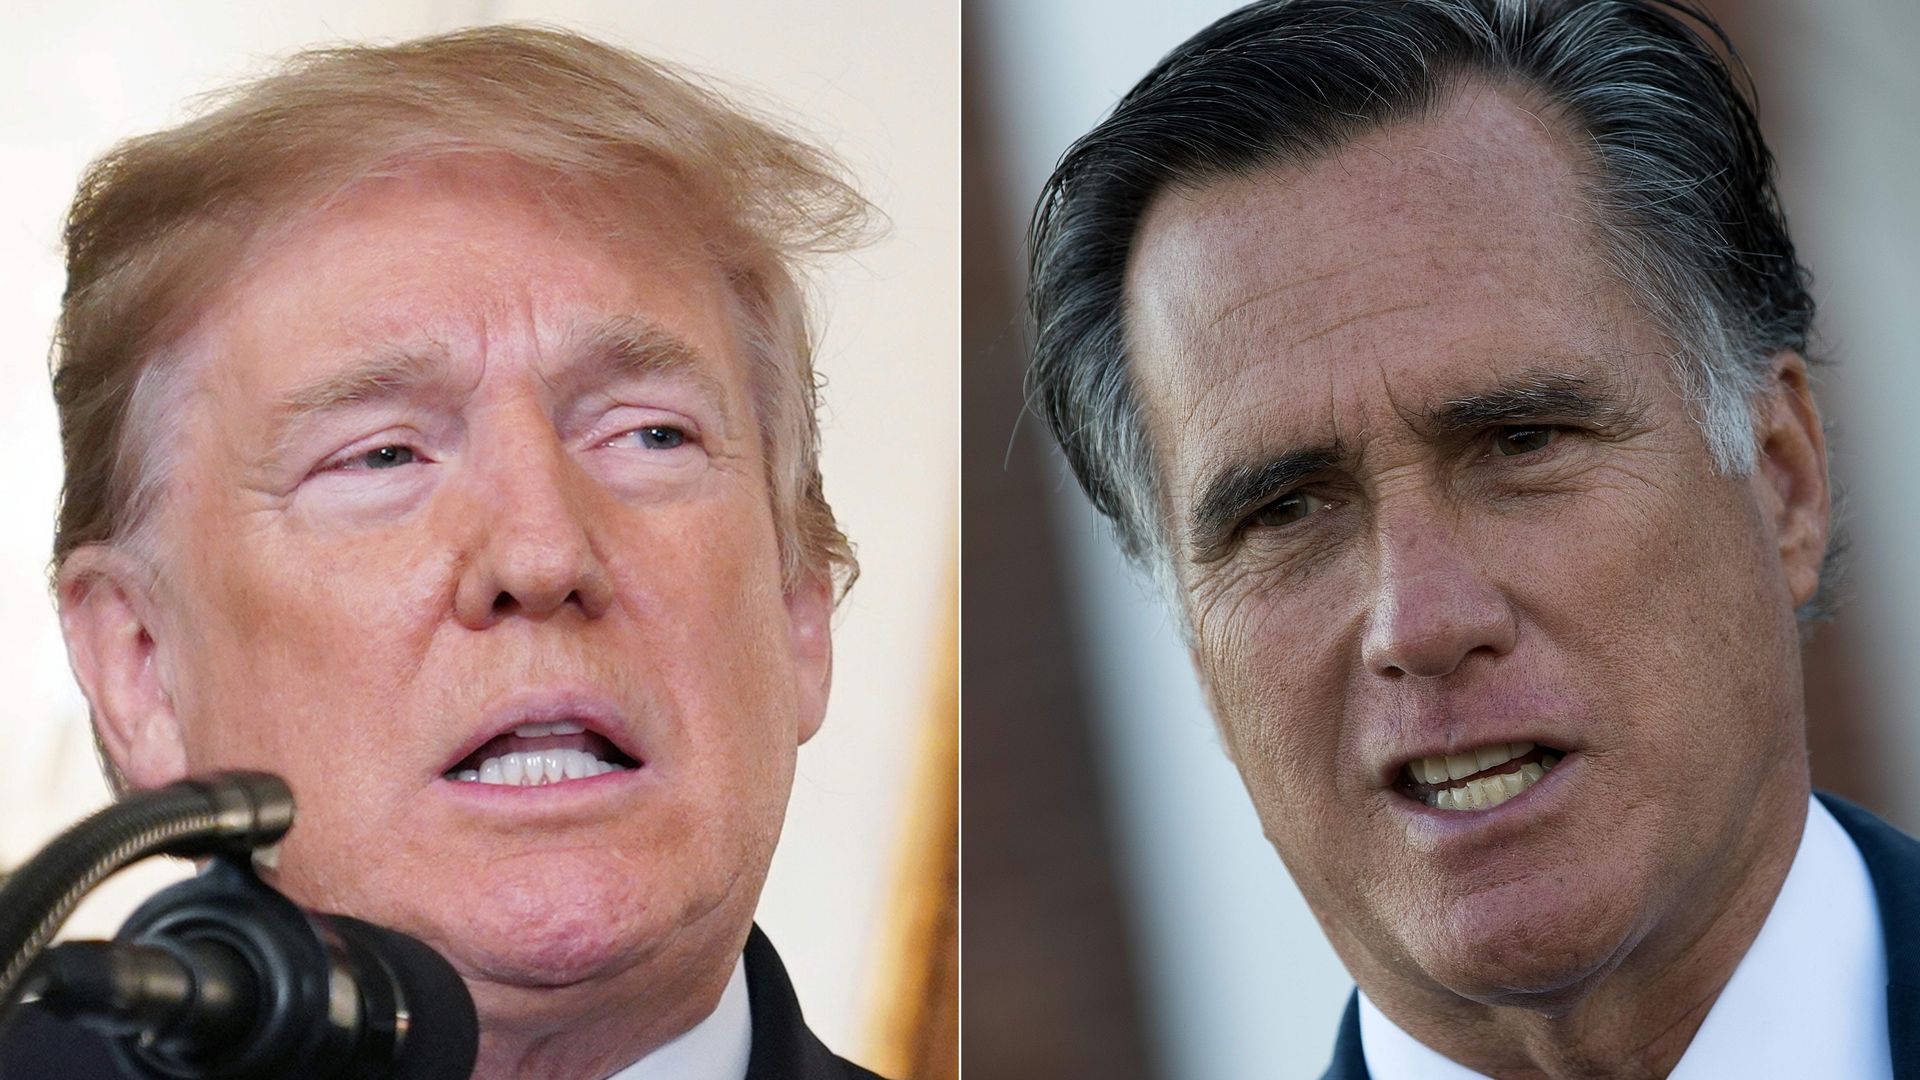 Donald Trump and Mitt Romney photos cropped together